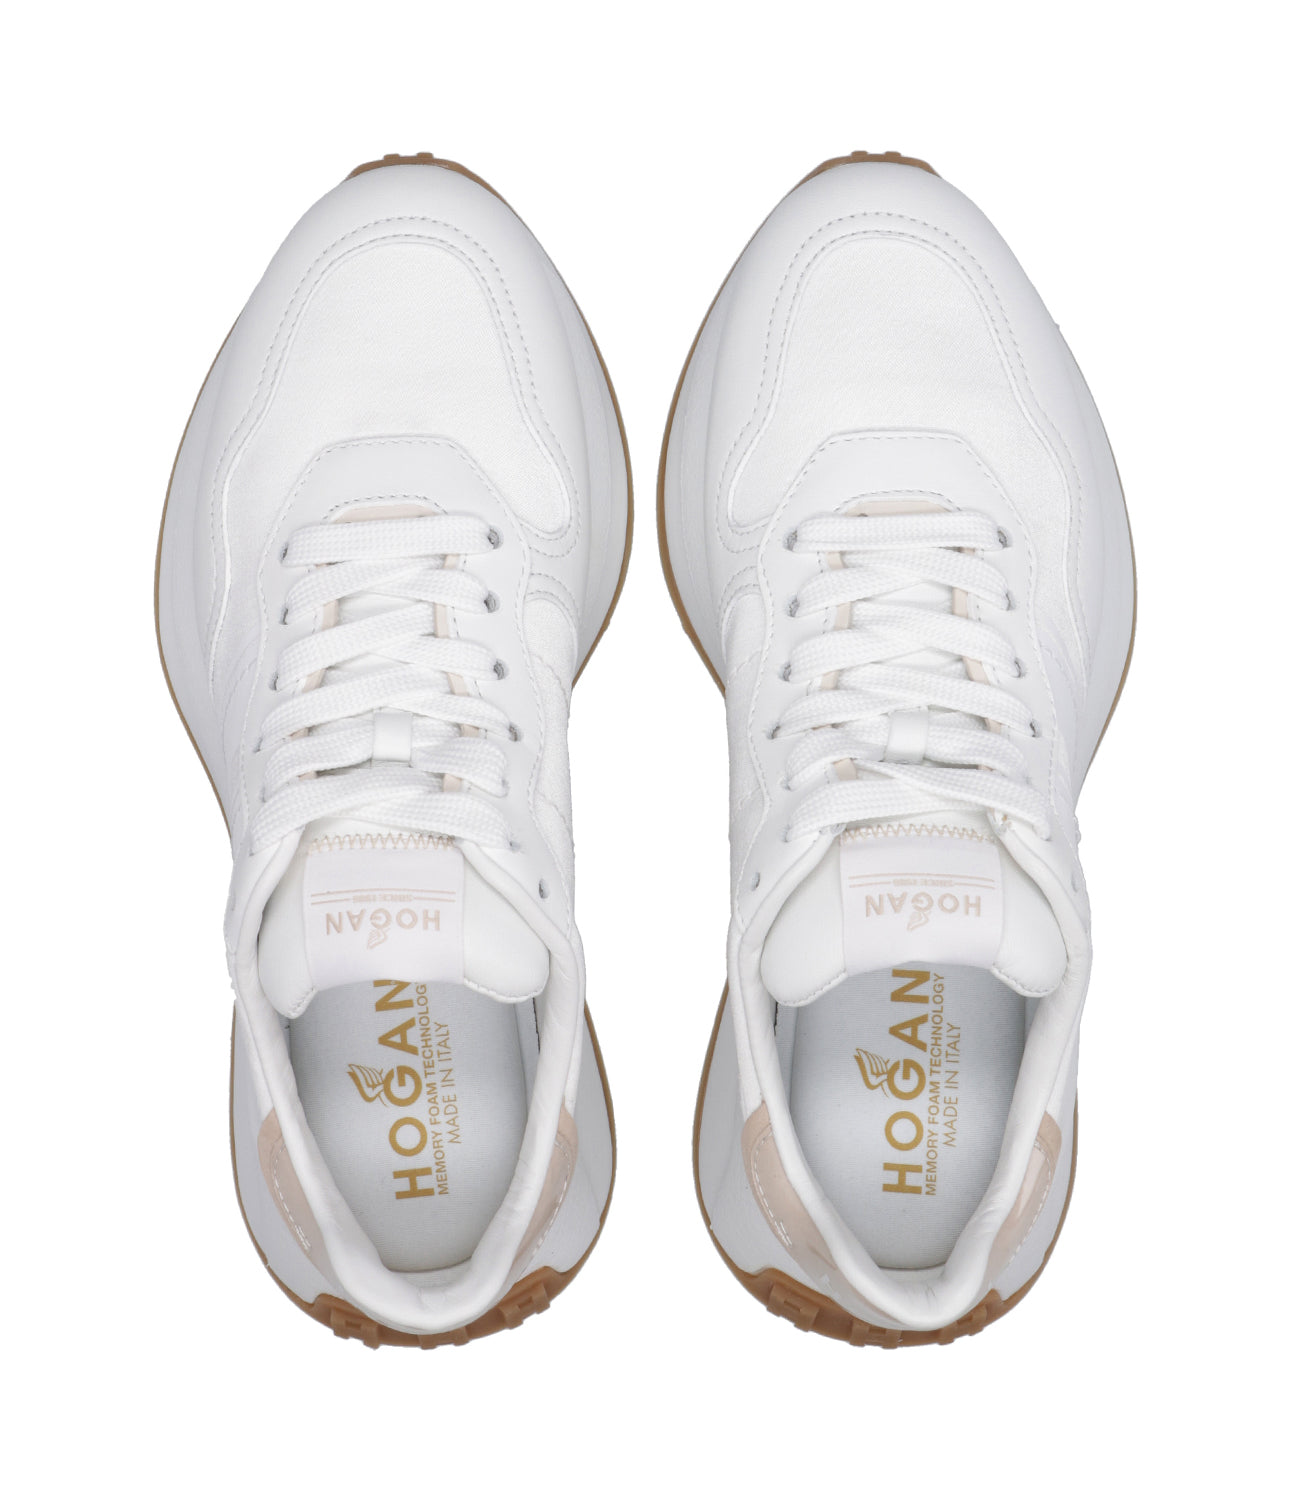 Hogan | H641 White and Beige Sneakers